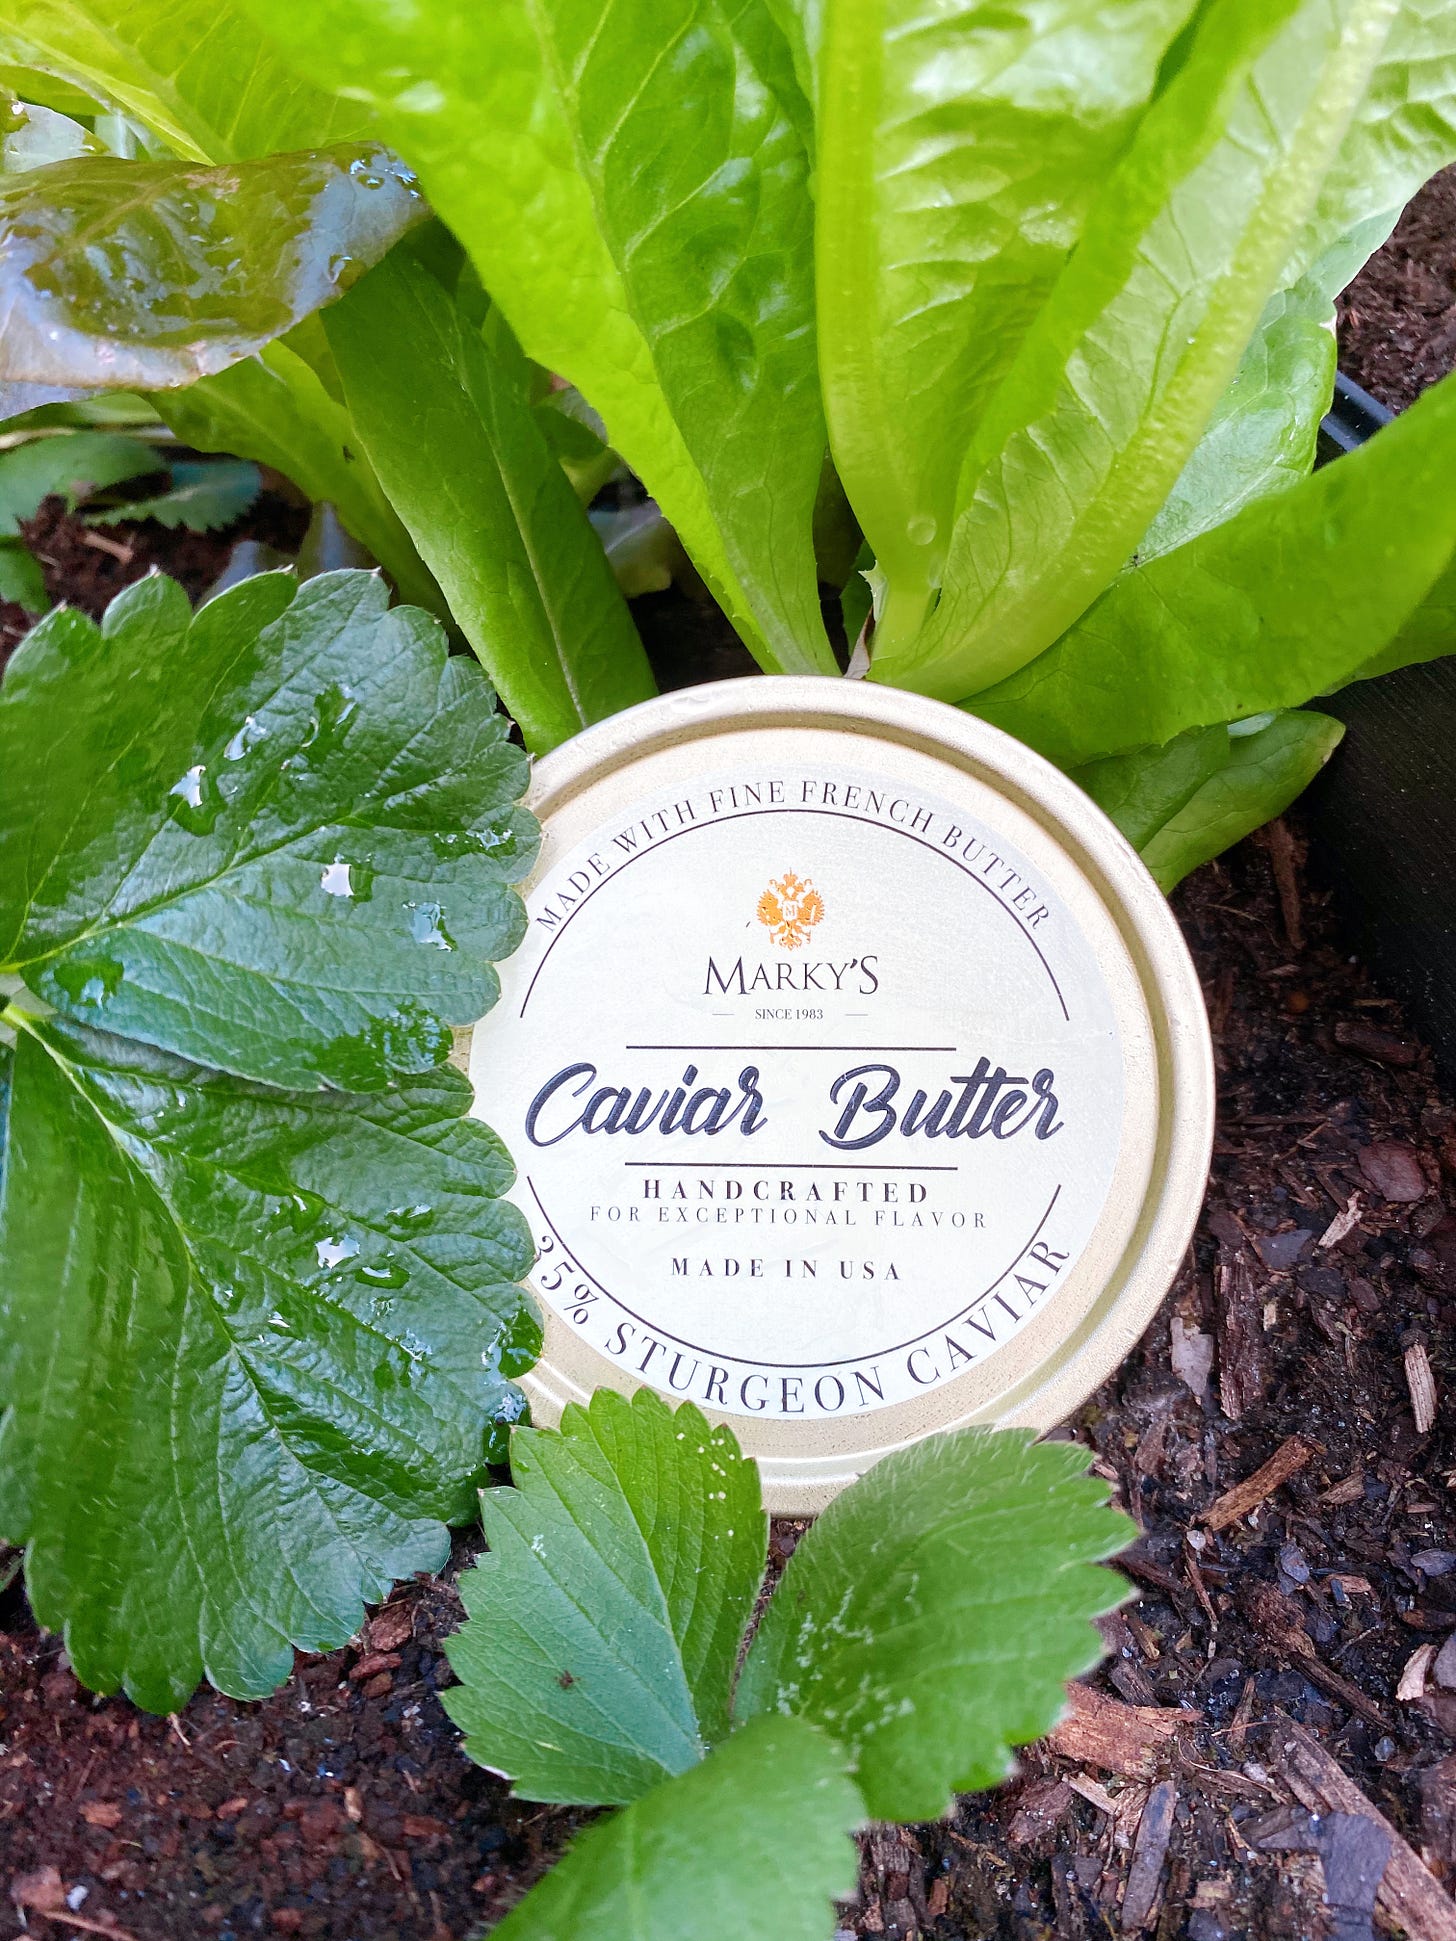 A tin of Marky's caviar butter rests in a garden bed with lettuce and strawberry leaves.